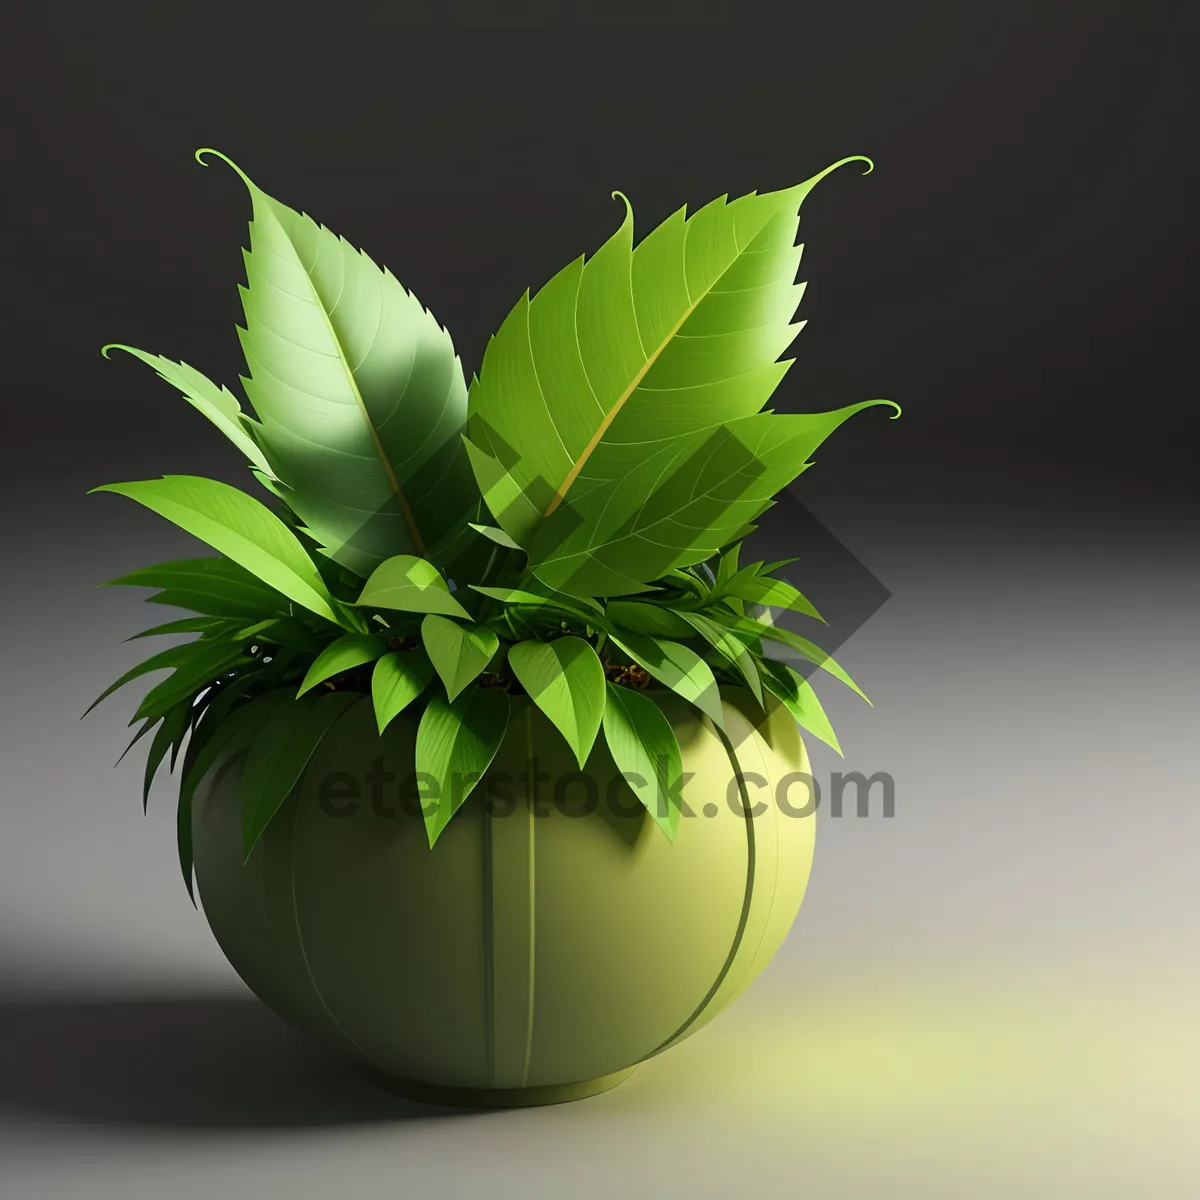 Picture of Vibrant Bamboo Leaf Design: Natural Flora and Bright Summer